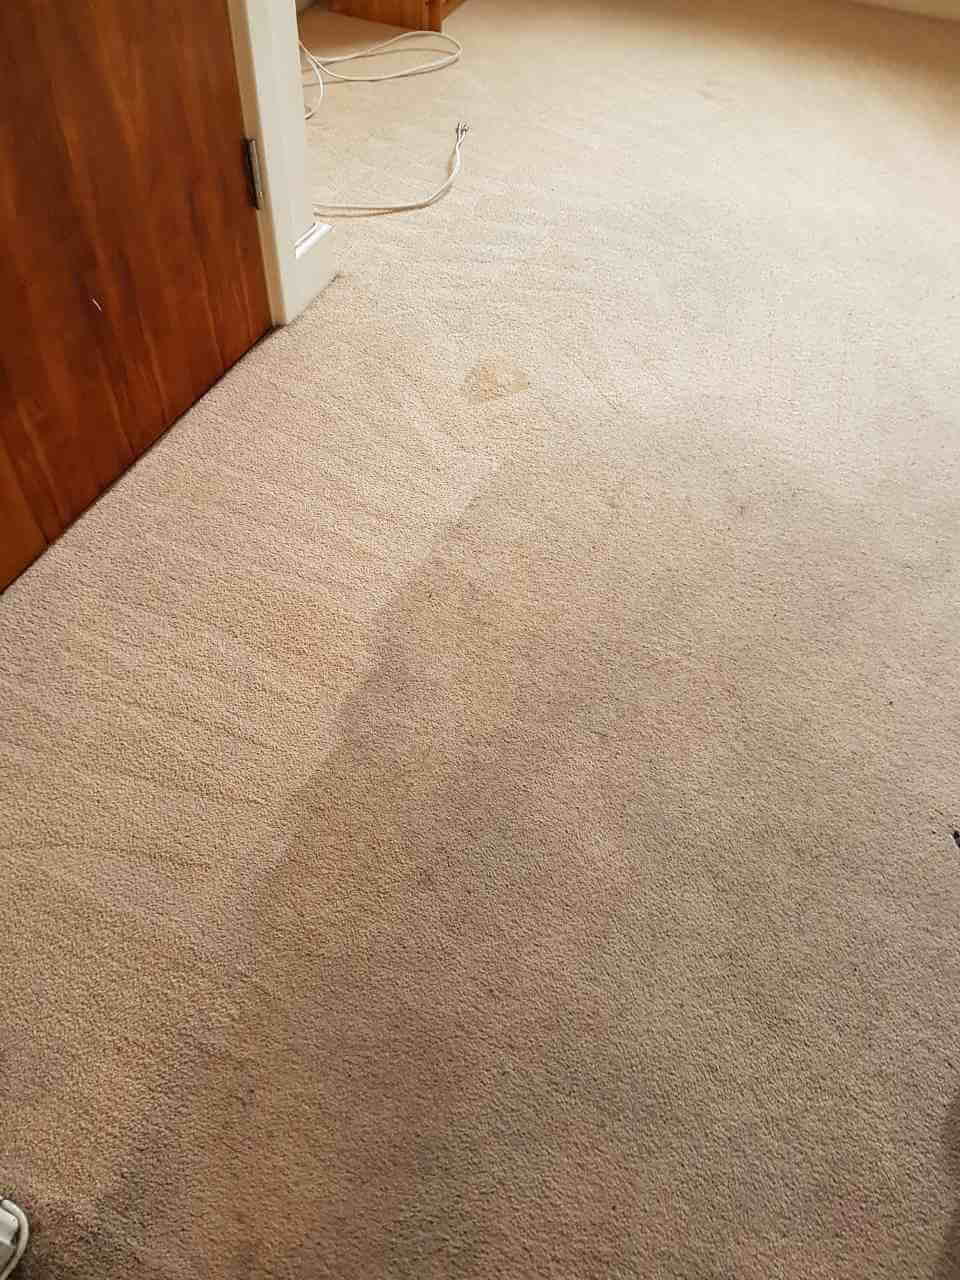 E3 carpet cleaning Bow